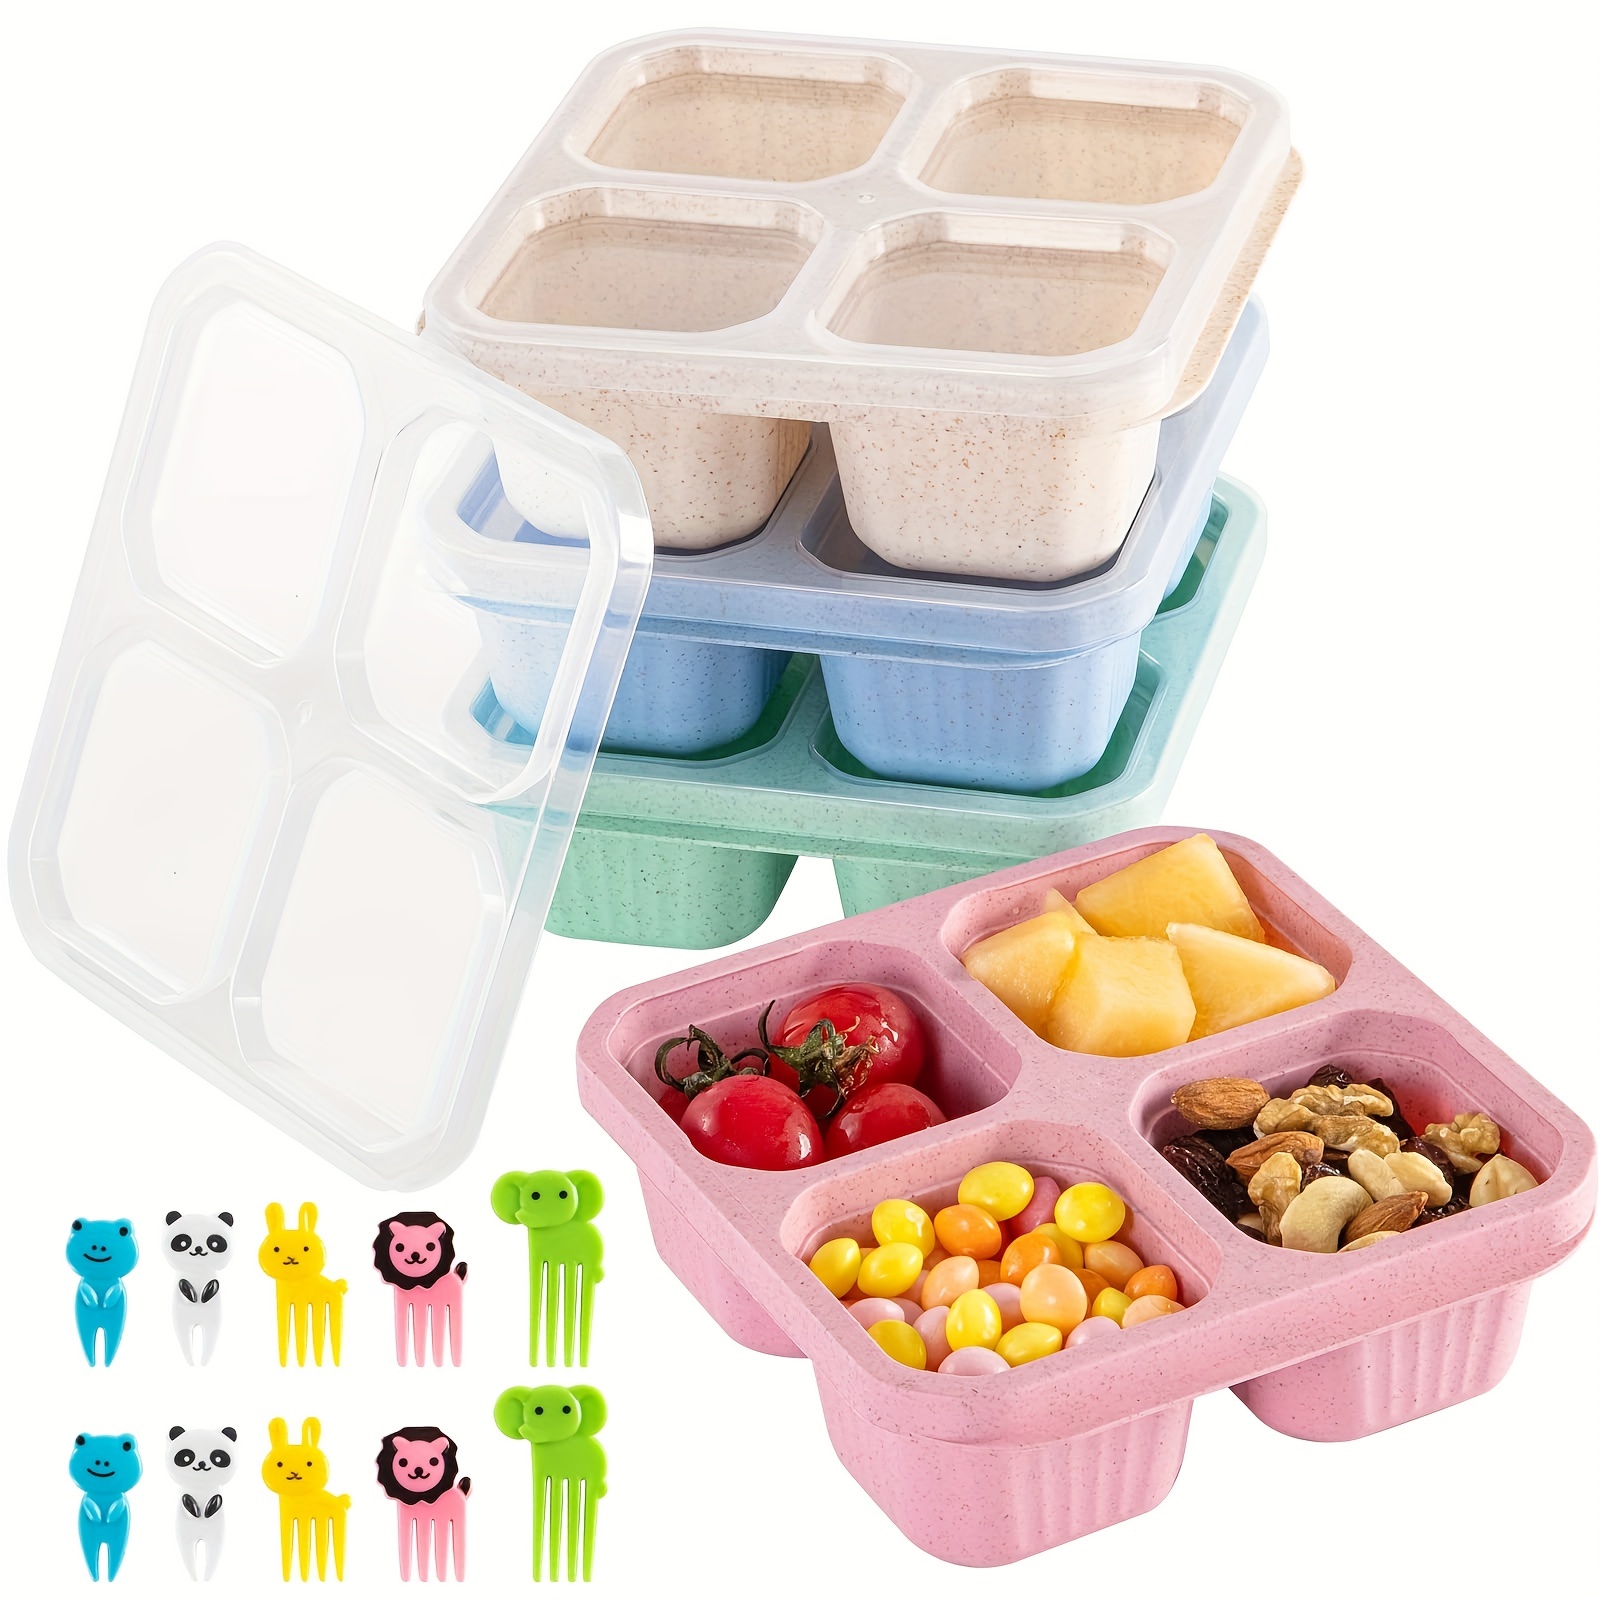 4 Pack Bento Lunch Box for Kids Adults, 2 Compartments Lunch Containers,  Reusable Meal Prep Containers with Lids, Microwave & Dishwasher Safe,  Divided